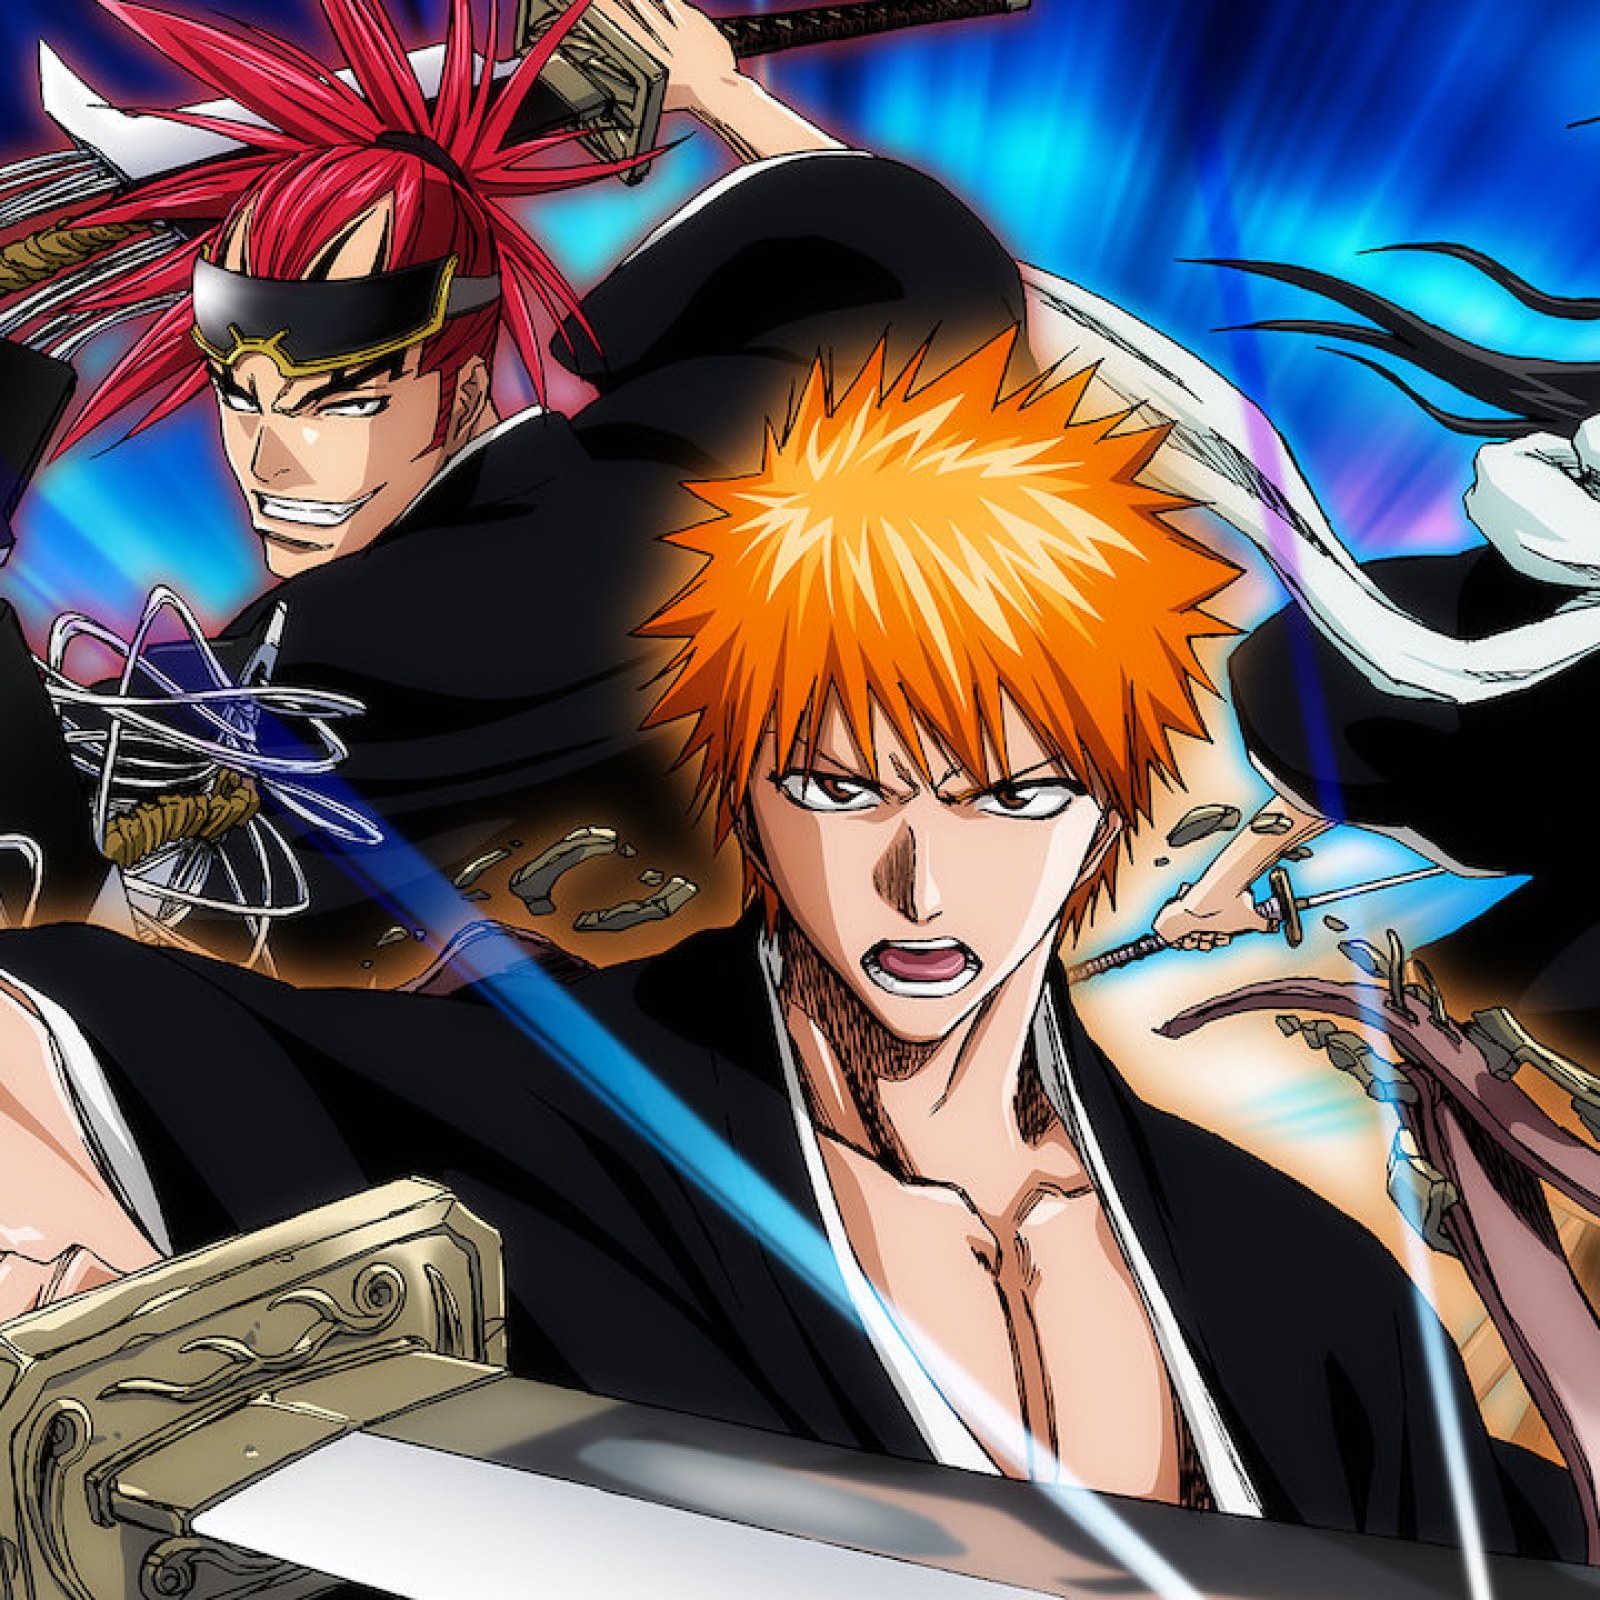 Bleach' Creator Tite Kubo Teases New Manga Arc in 20th Anniversary Special